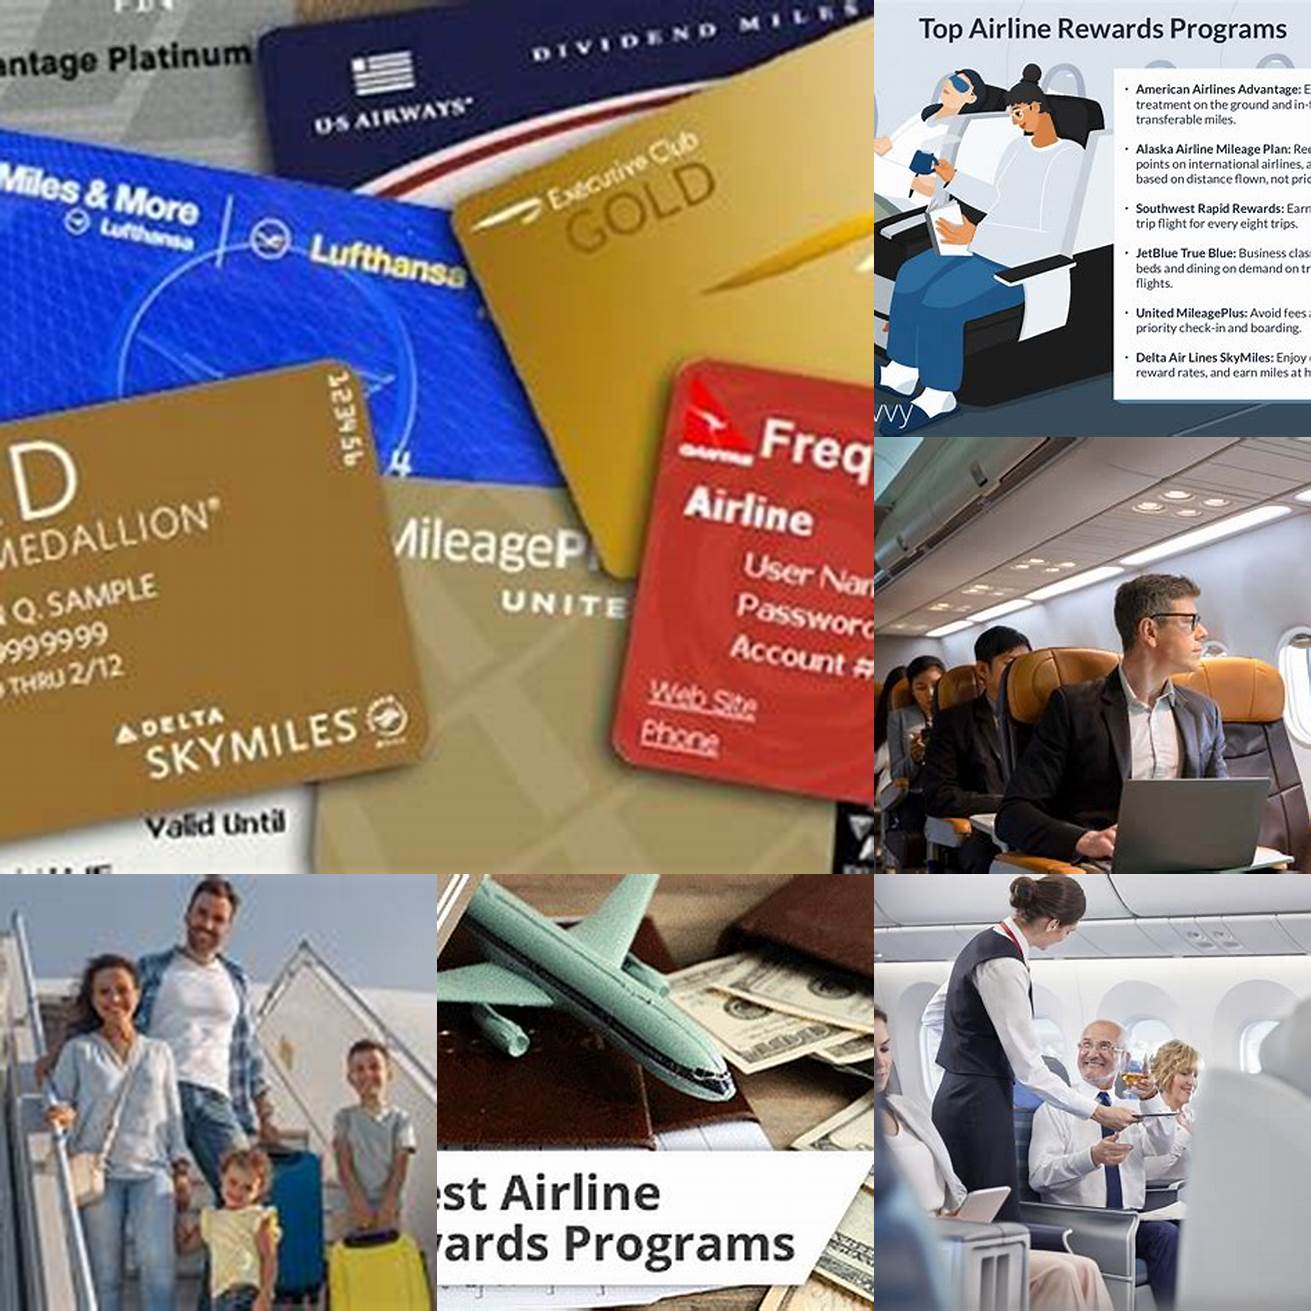 4 Airline Loyalty Consider your airline loyalty program when choosing a flat bed